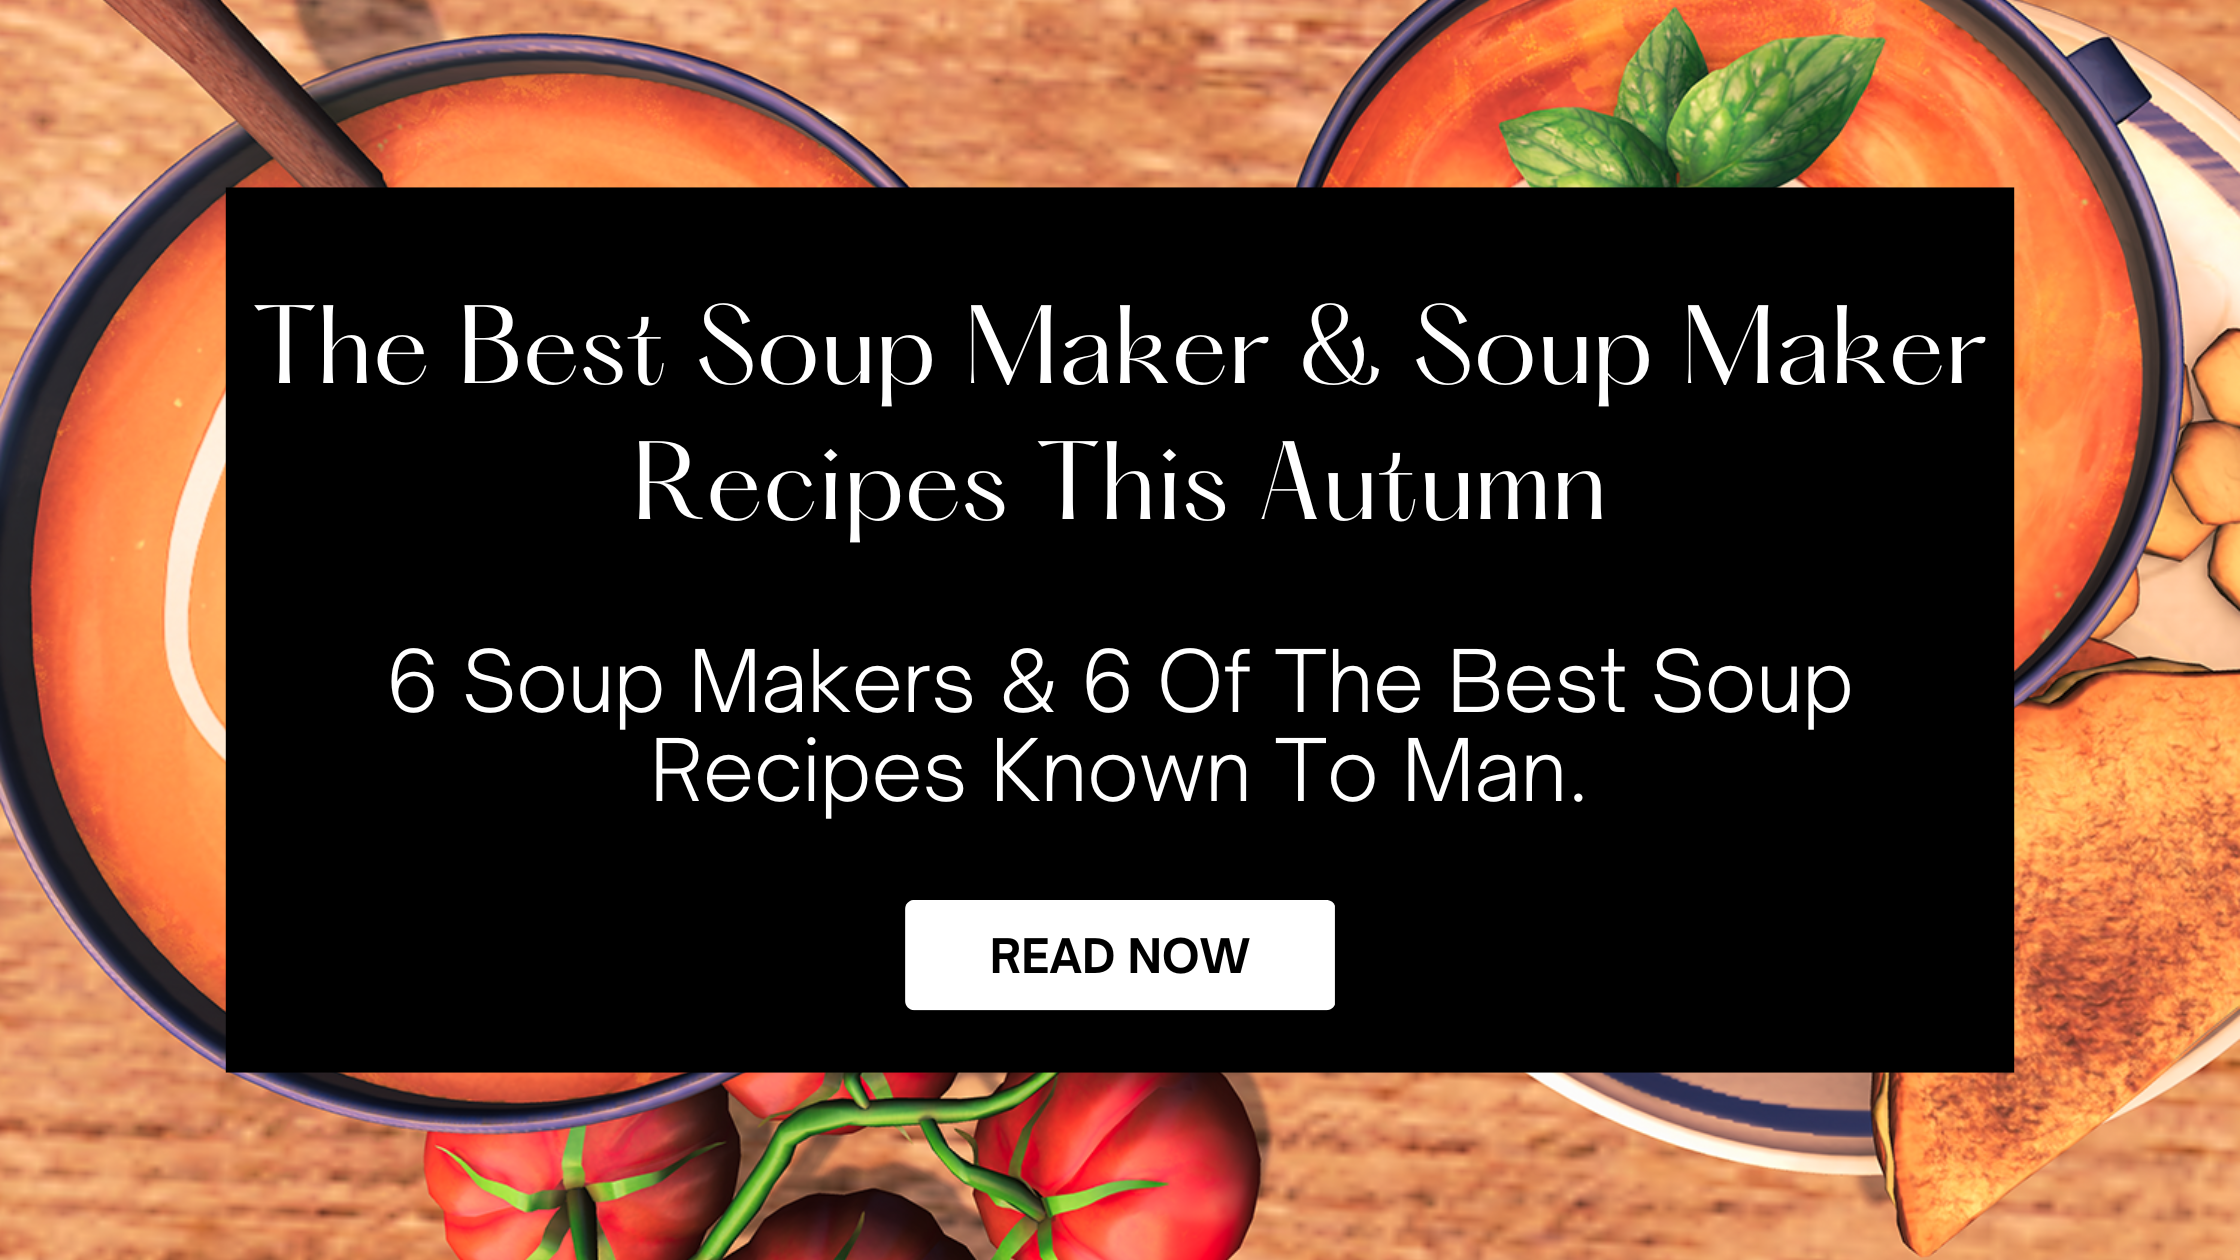 What else can you make in a soup maker – AENO Blog